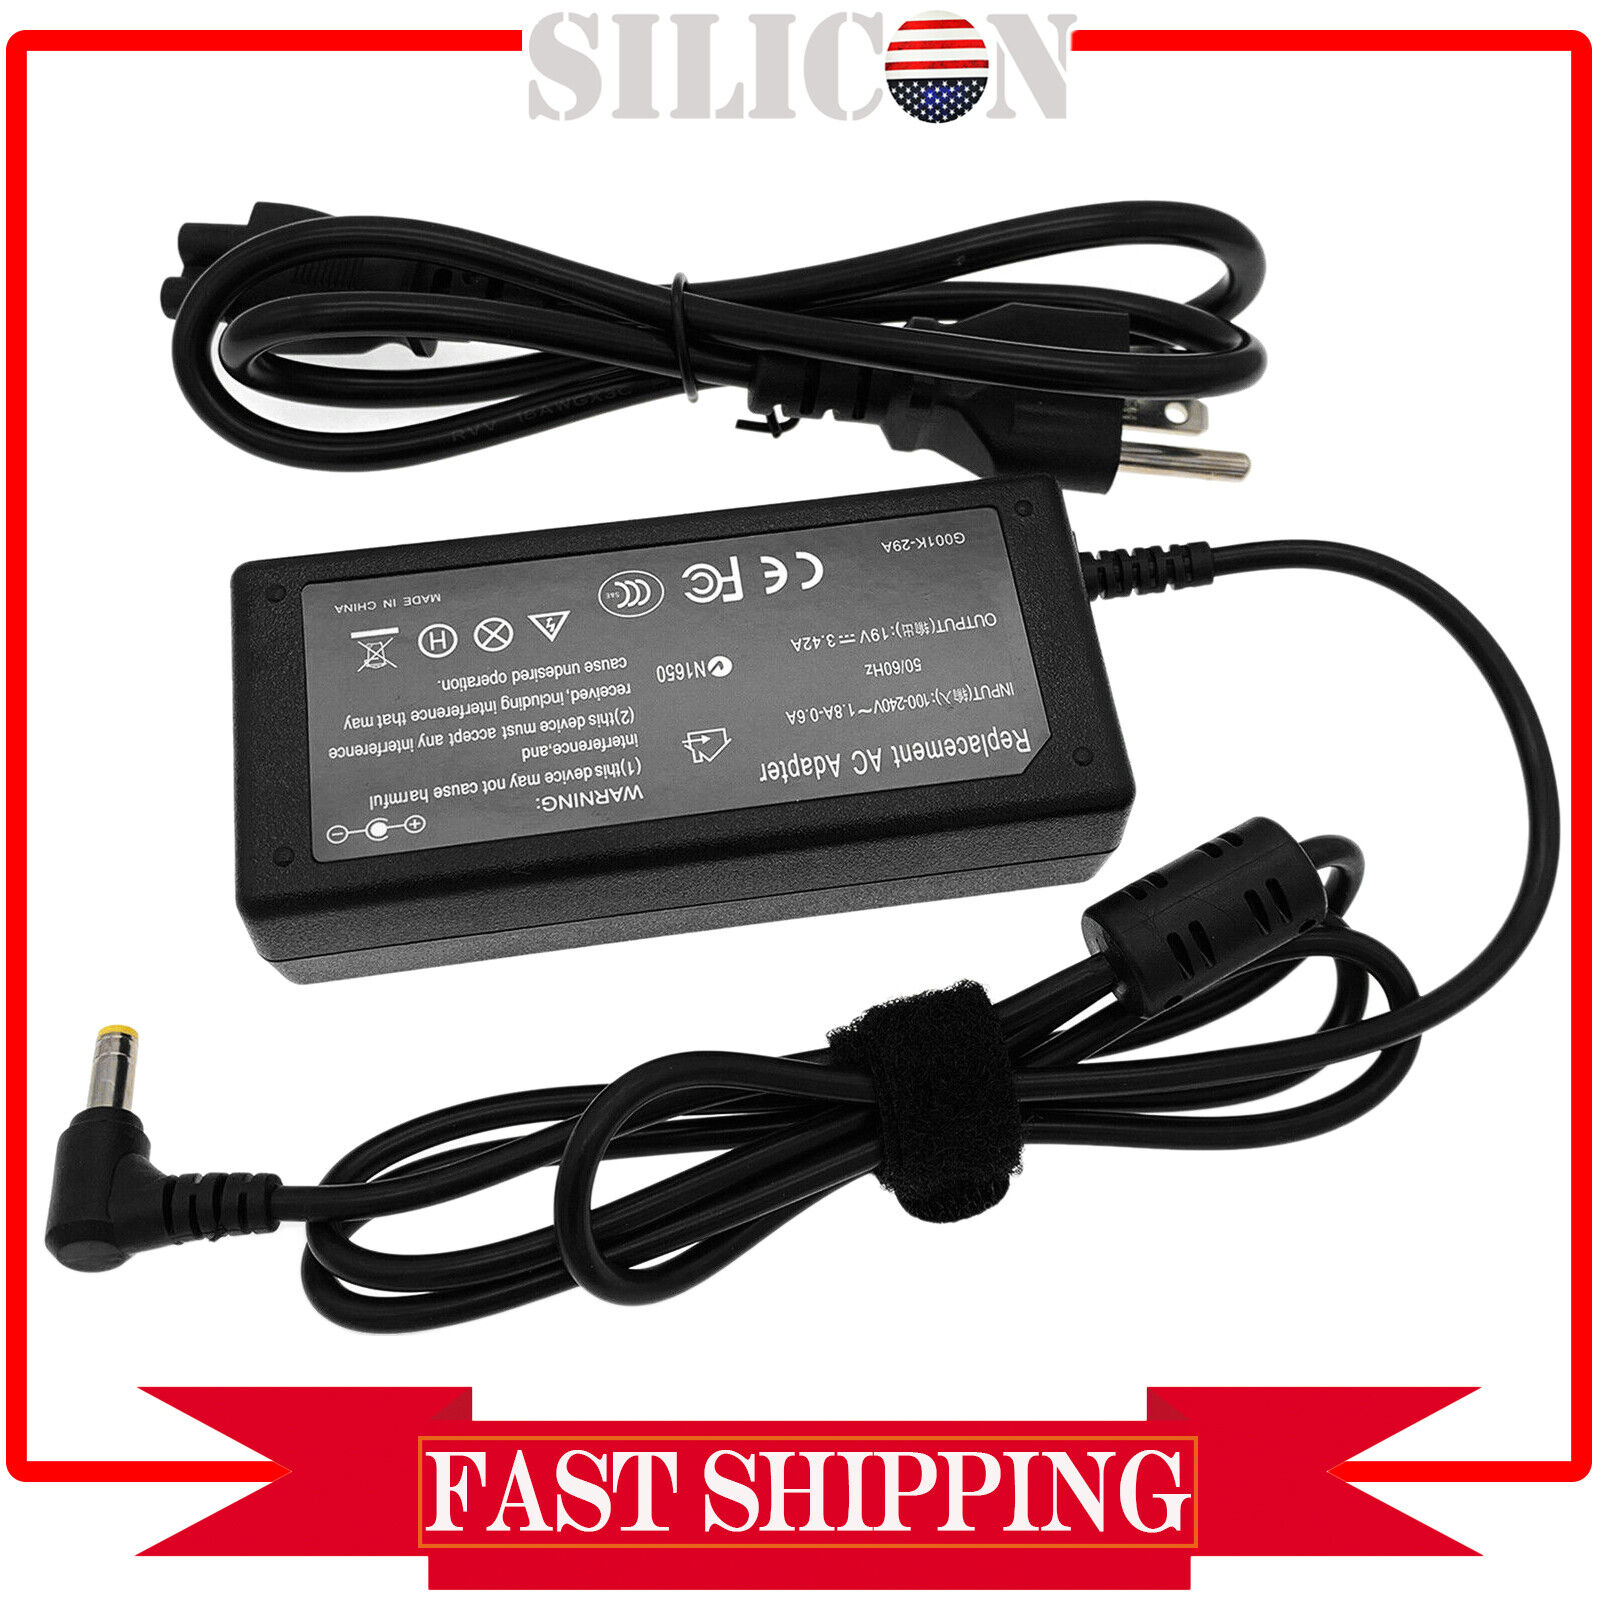 AC Adapter For Getac S410 Semi-Rugged Laptop 65W Charger Power Supply Cord